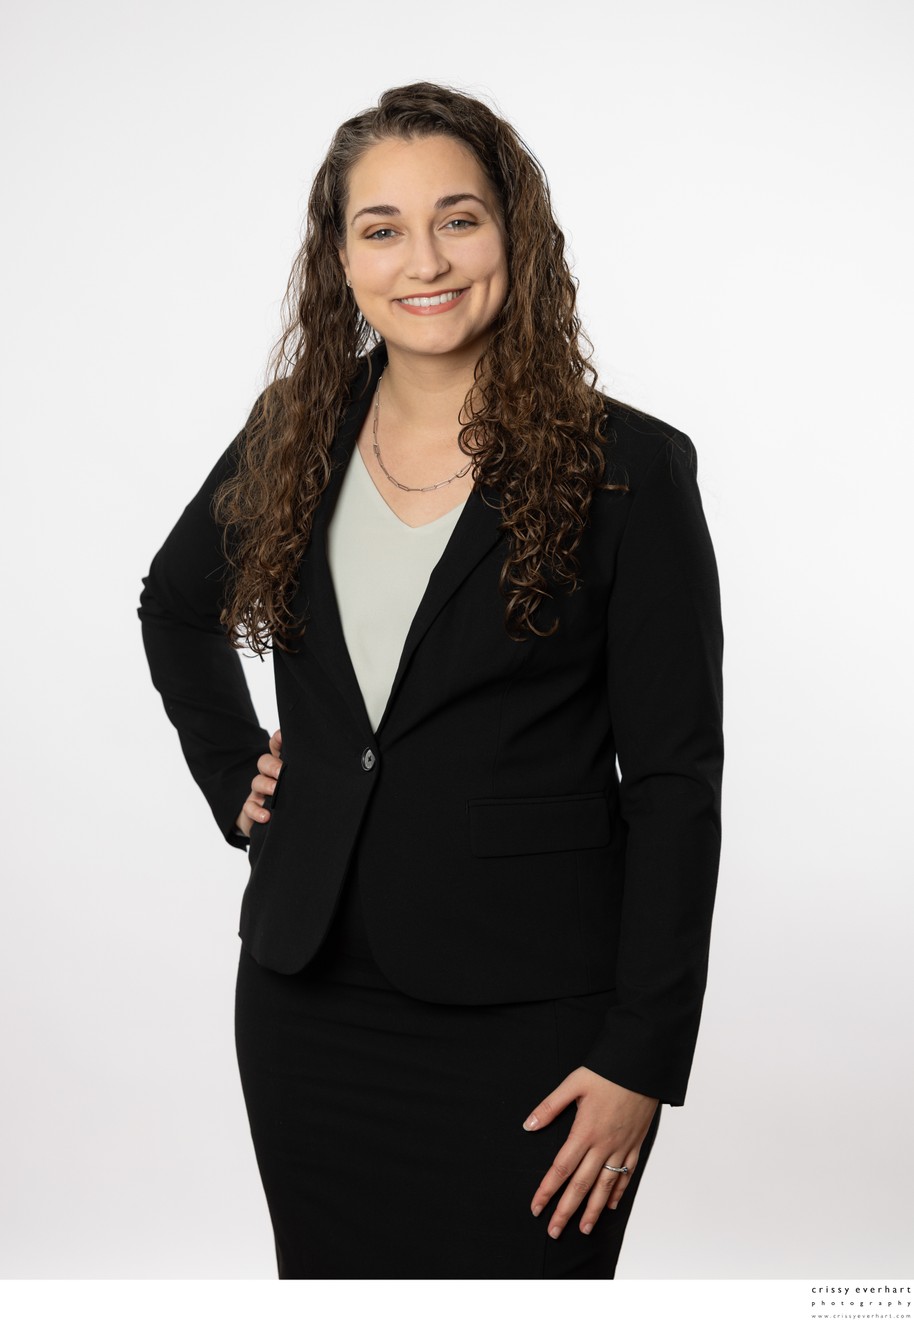 Business Portraits for Law Firms